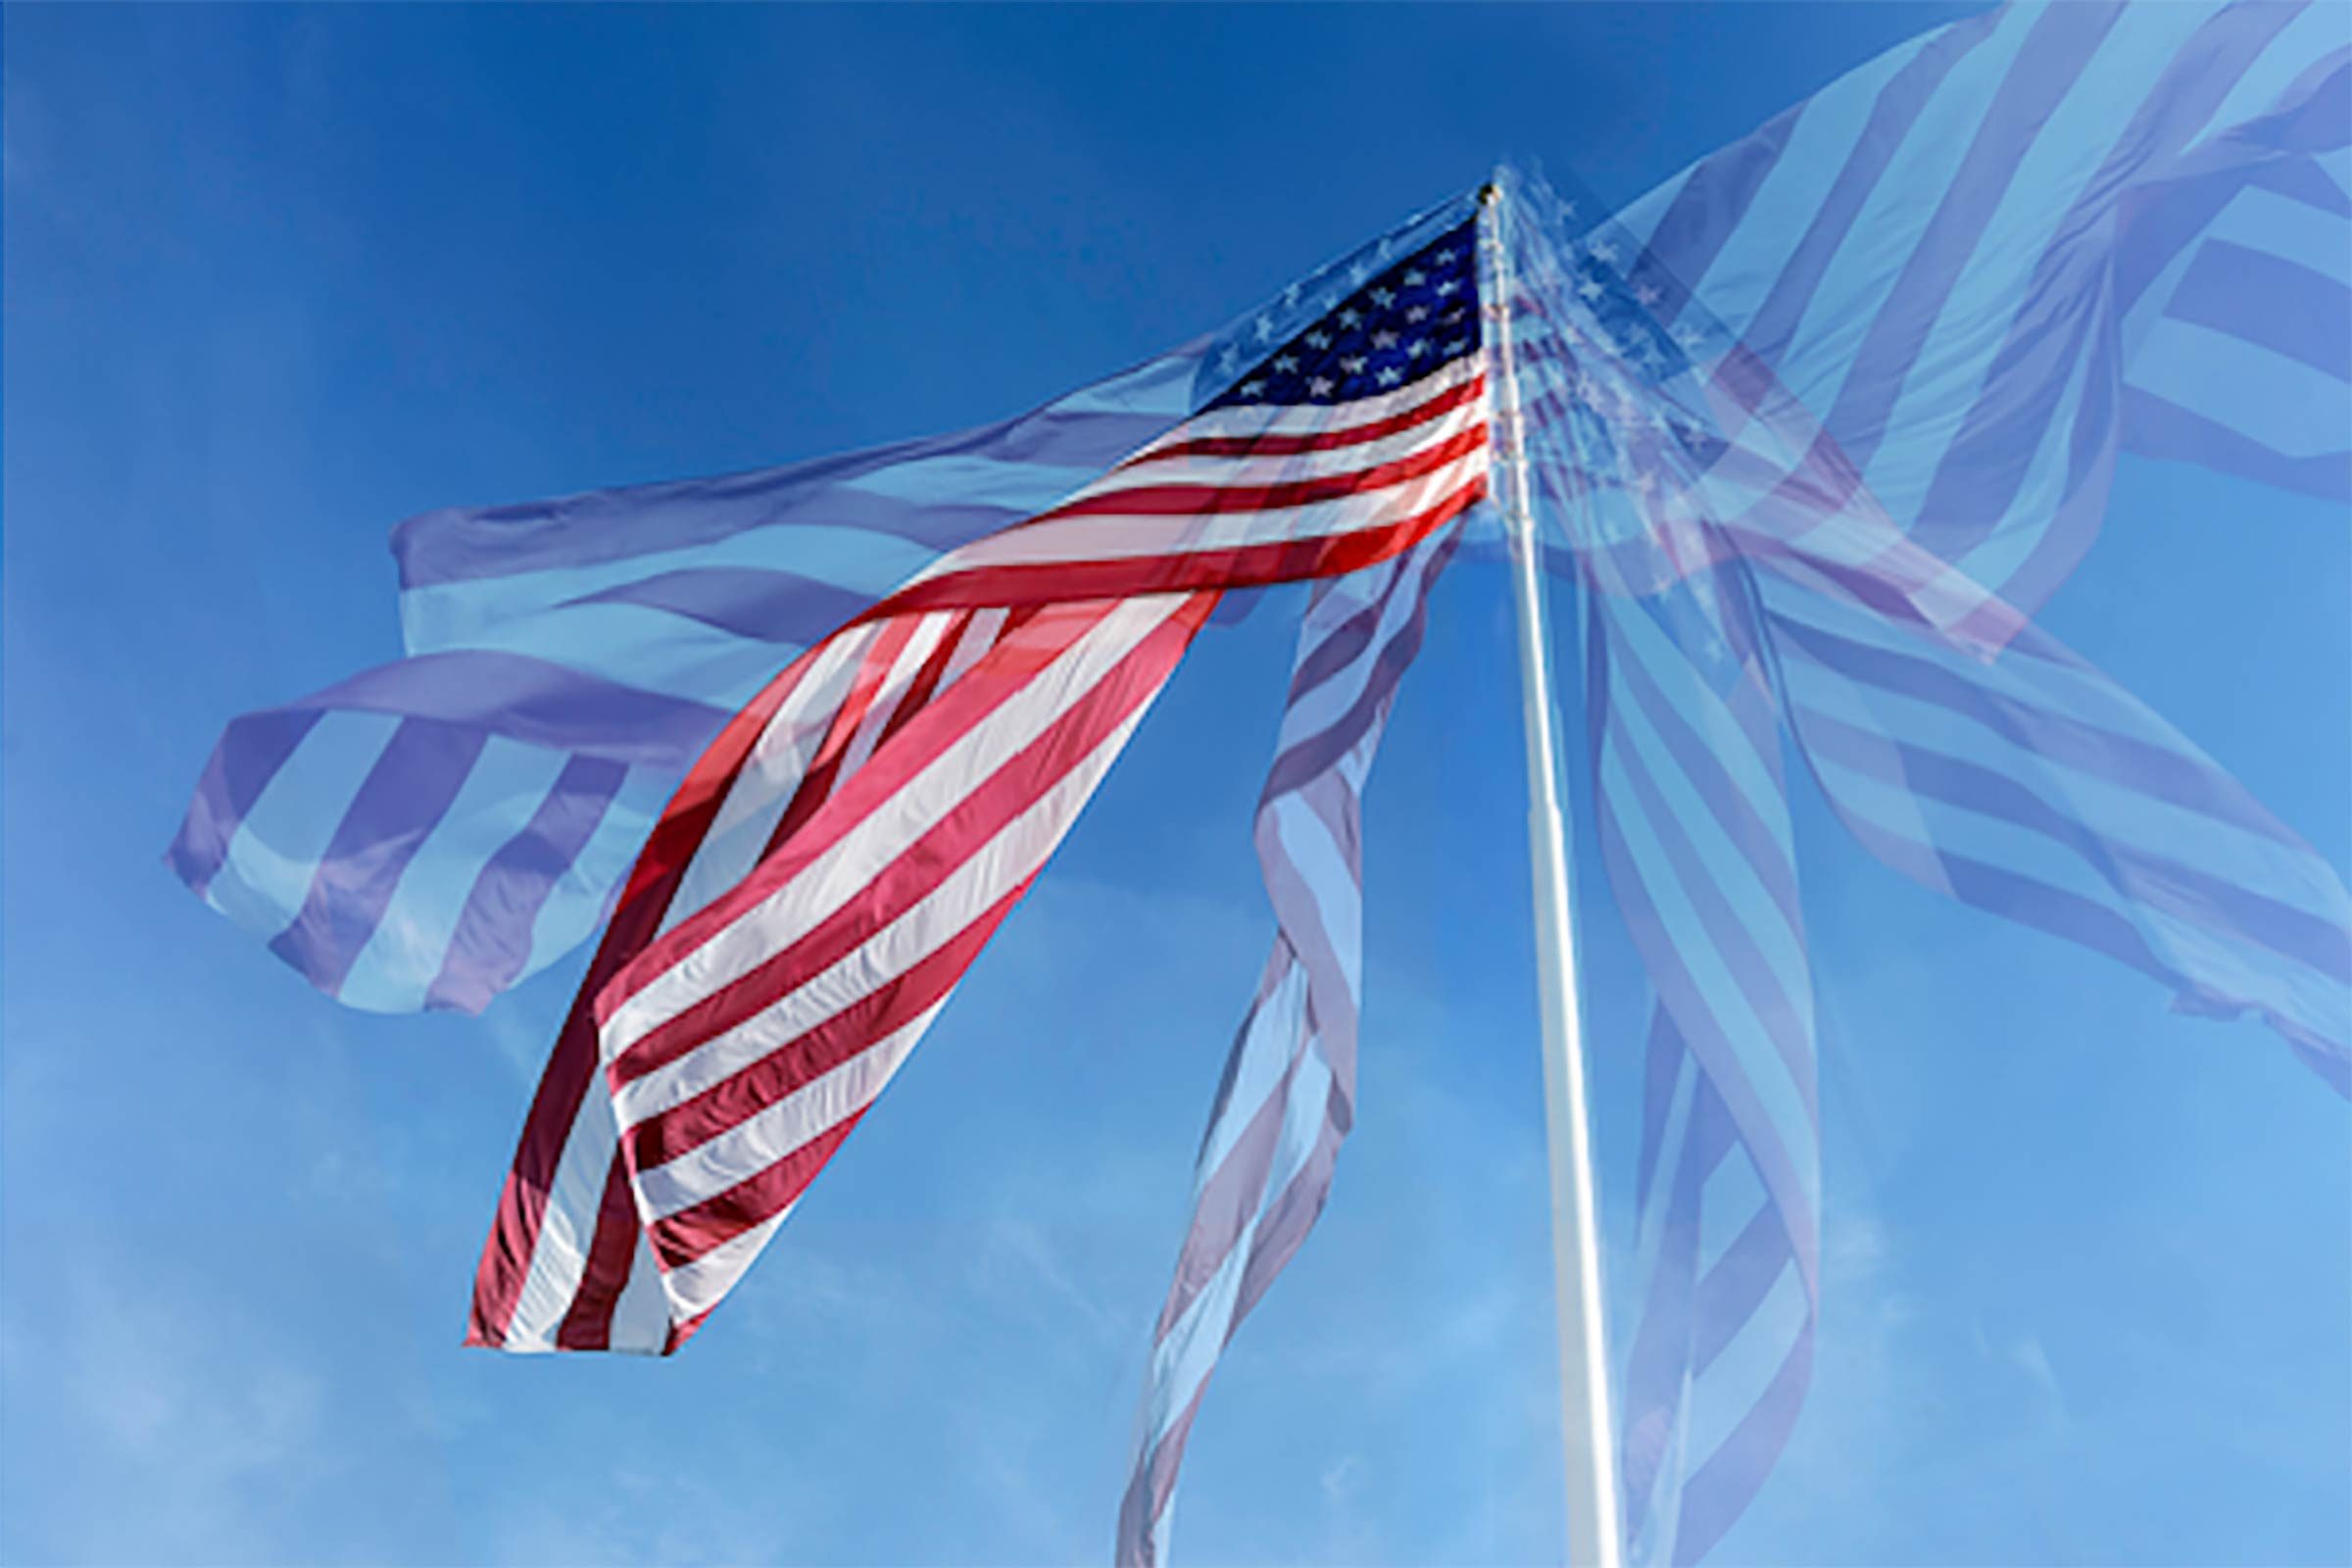 a multiple exposure image of an american flag waving against a blue sky